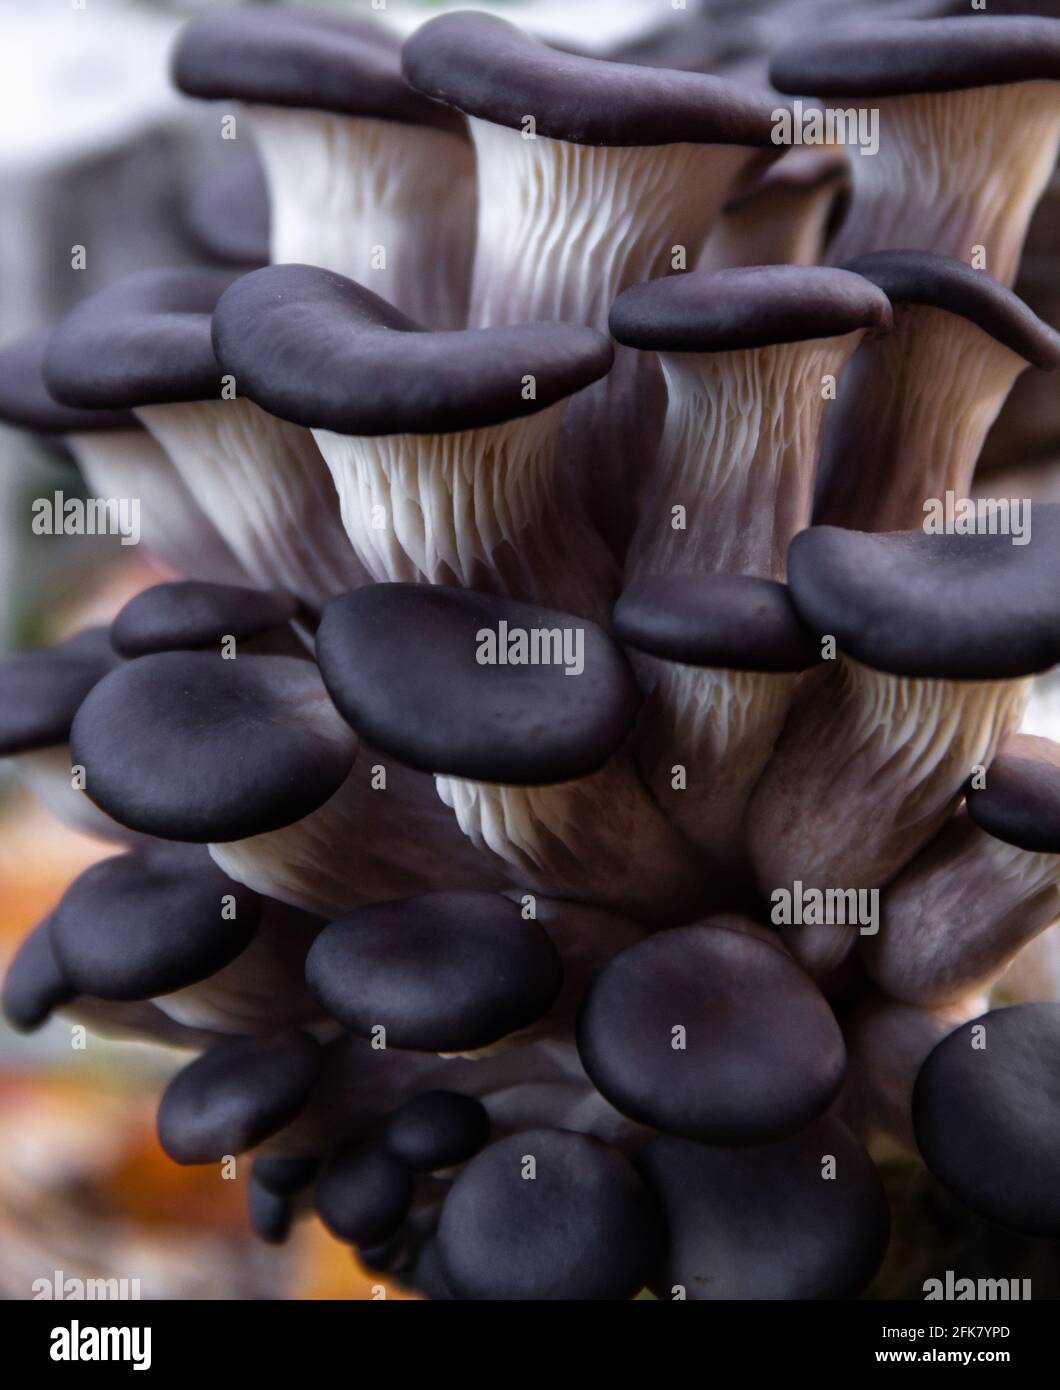 Oyster mushroom cultivation food background Stock Photo